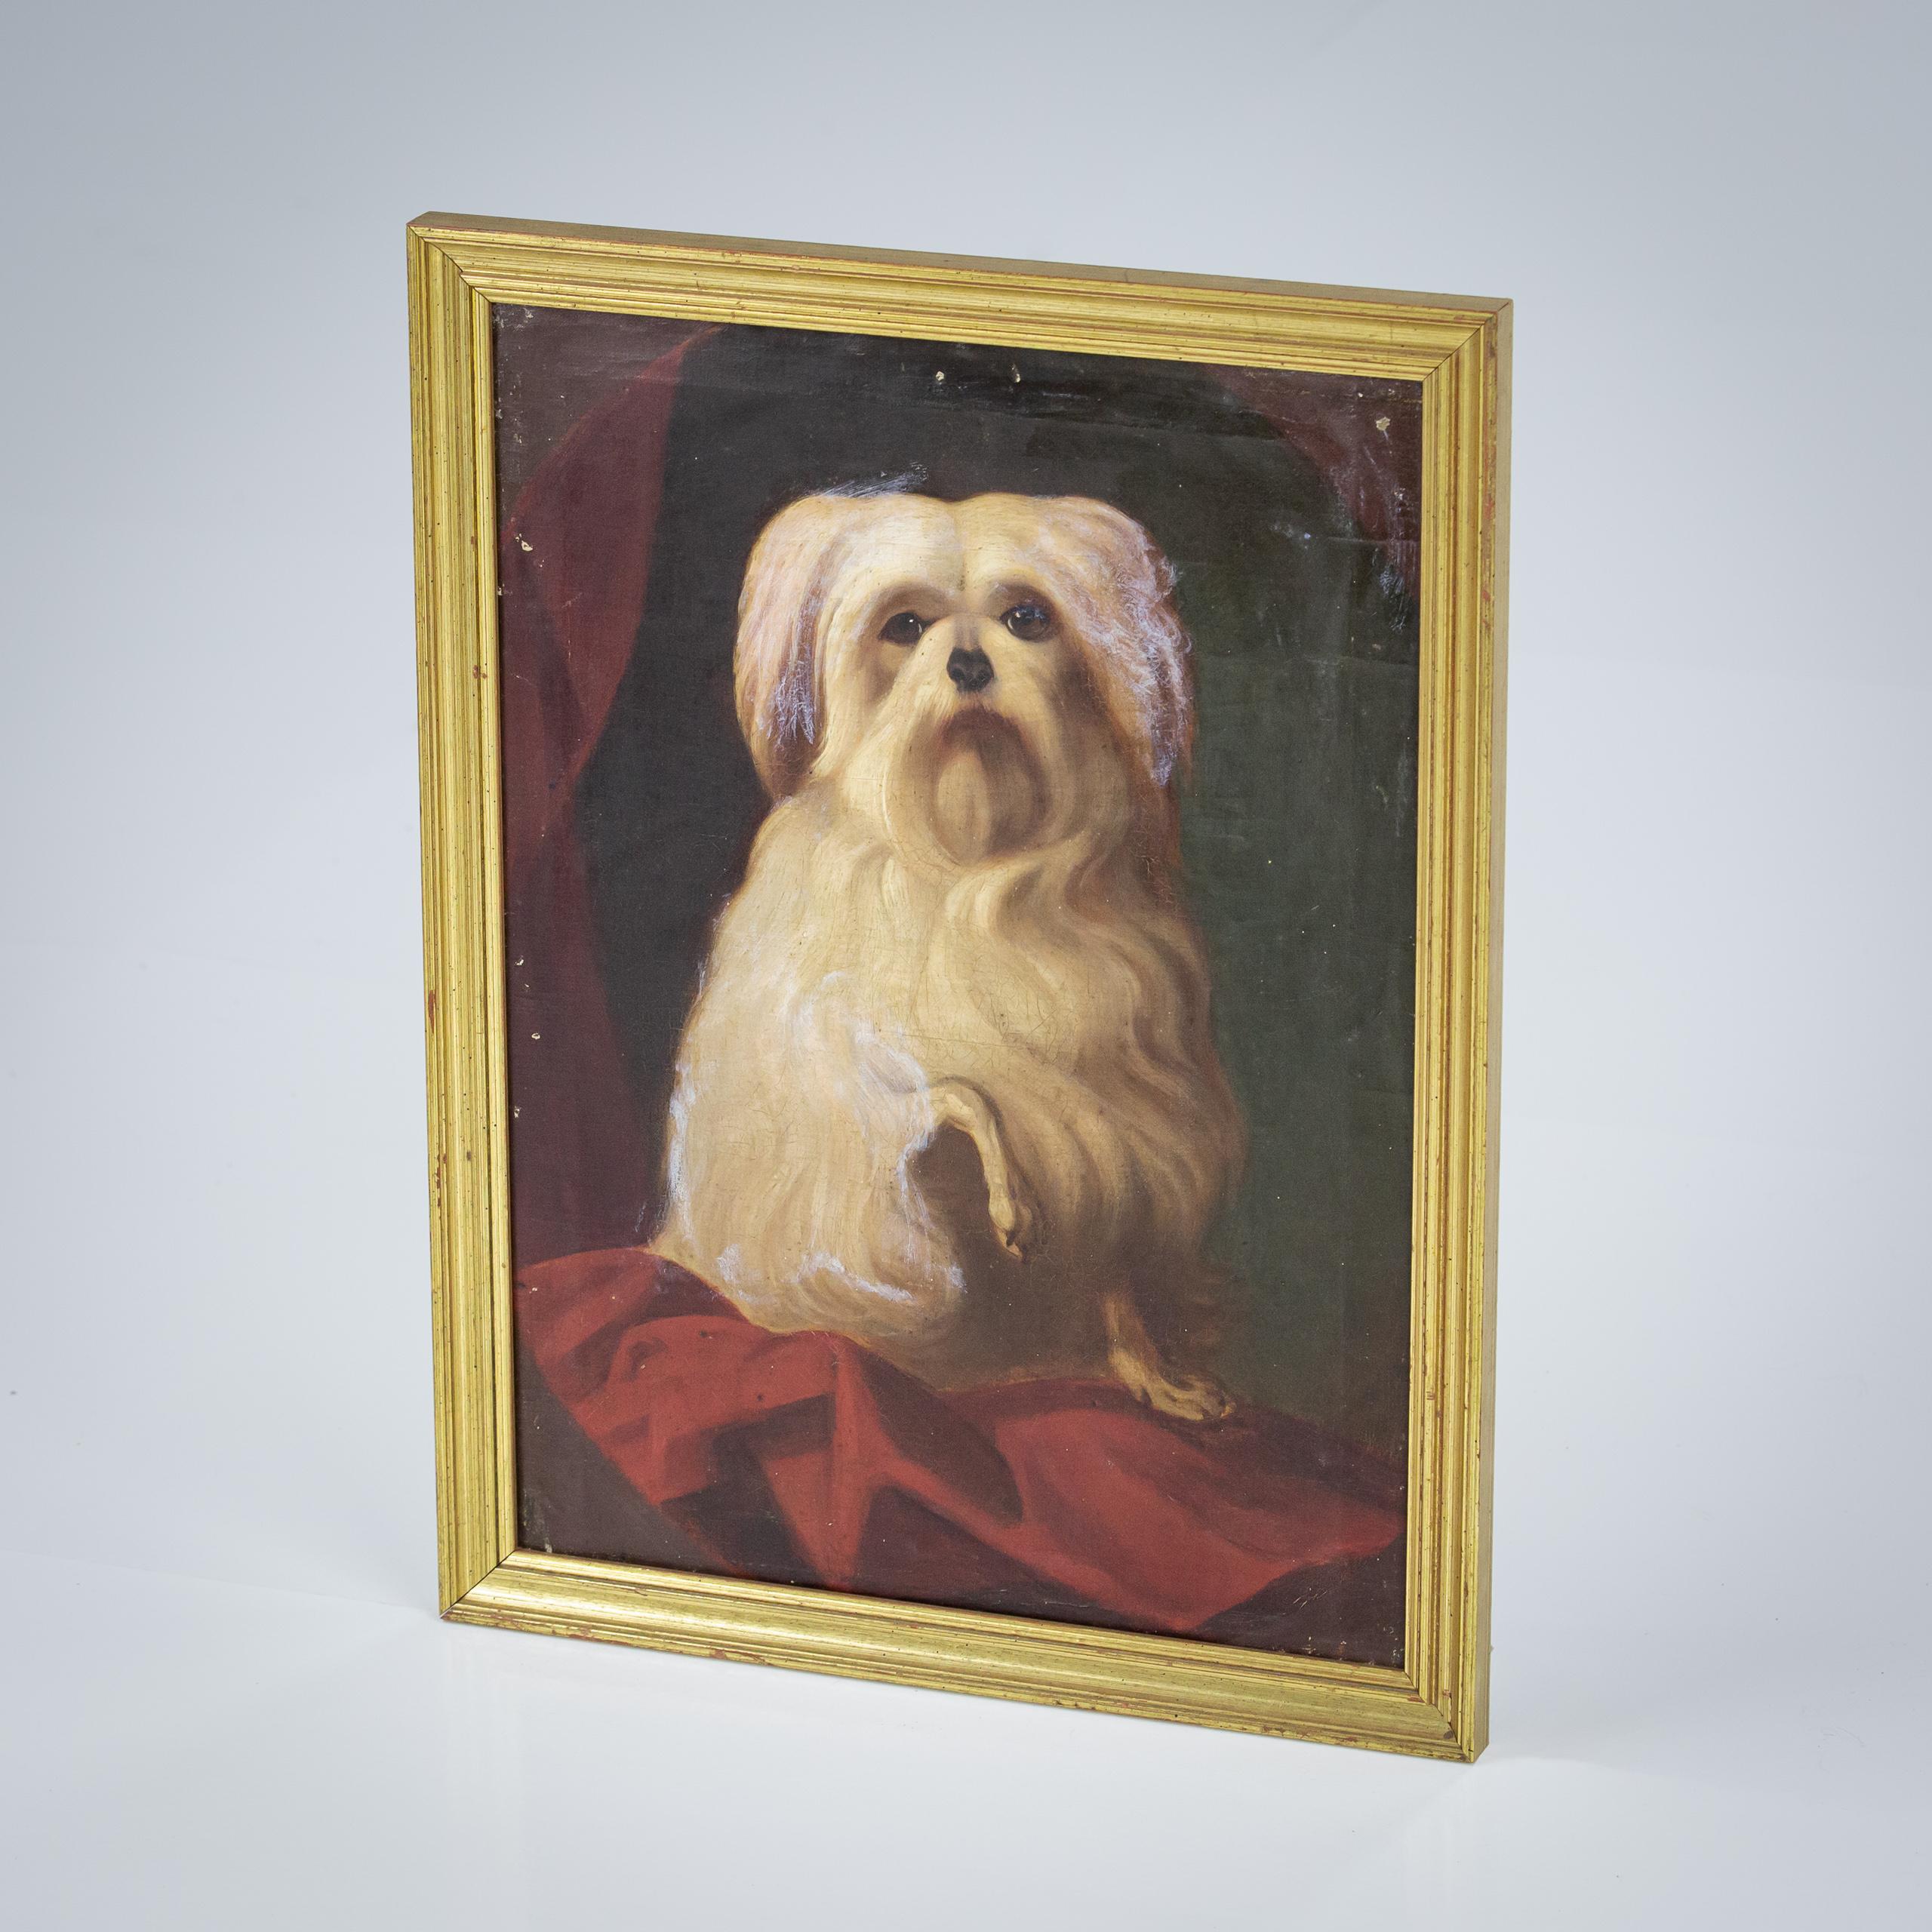 Charismatic 19th Century Oil on Canvas Dog Portrait, Offering Paw. 
Some Blooming, predominantly to the ears and the left side of the dog.
Untouched country house condition with minor blemishes 
France, Circa 1880.